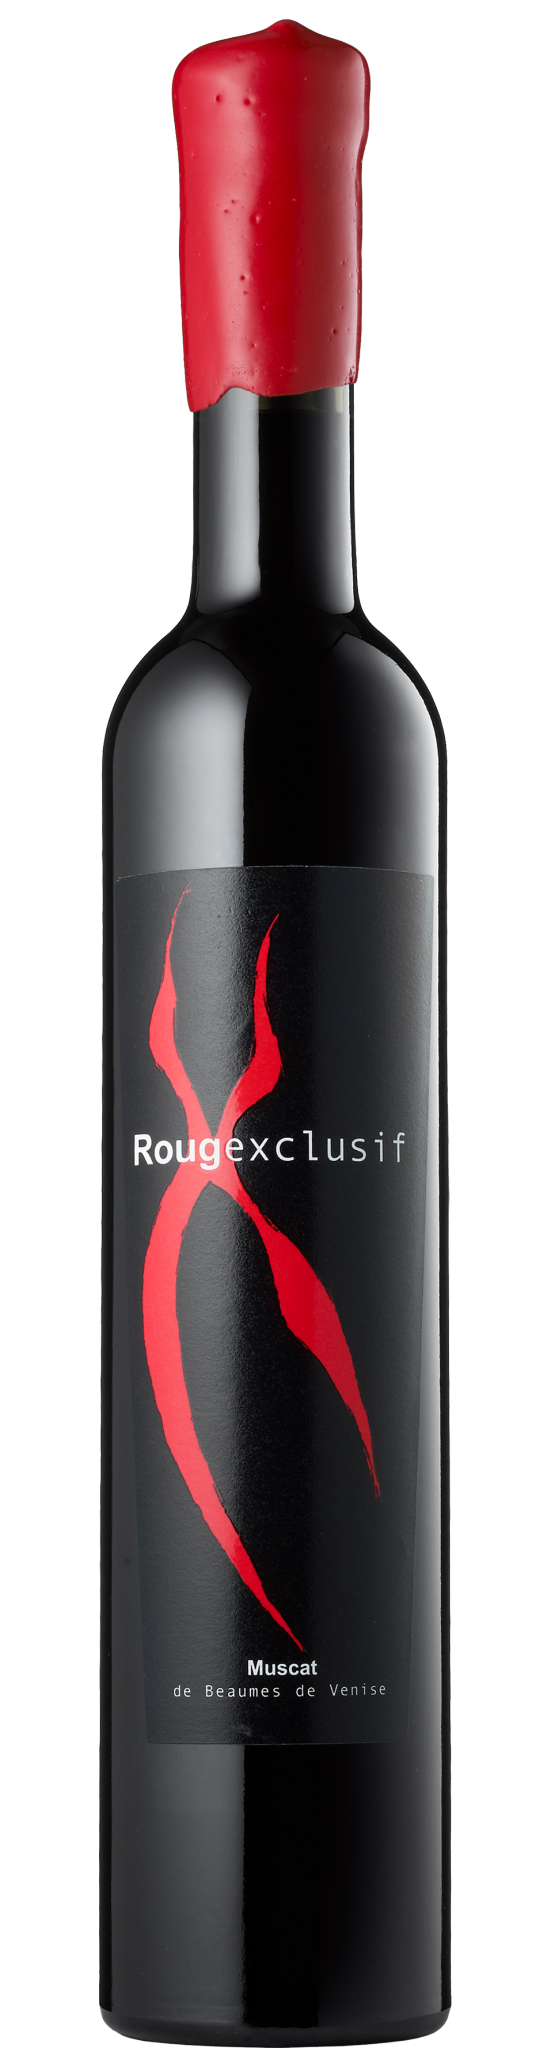 Rouge Exclusif